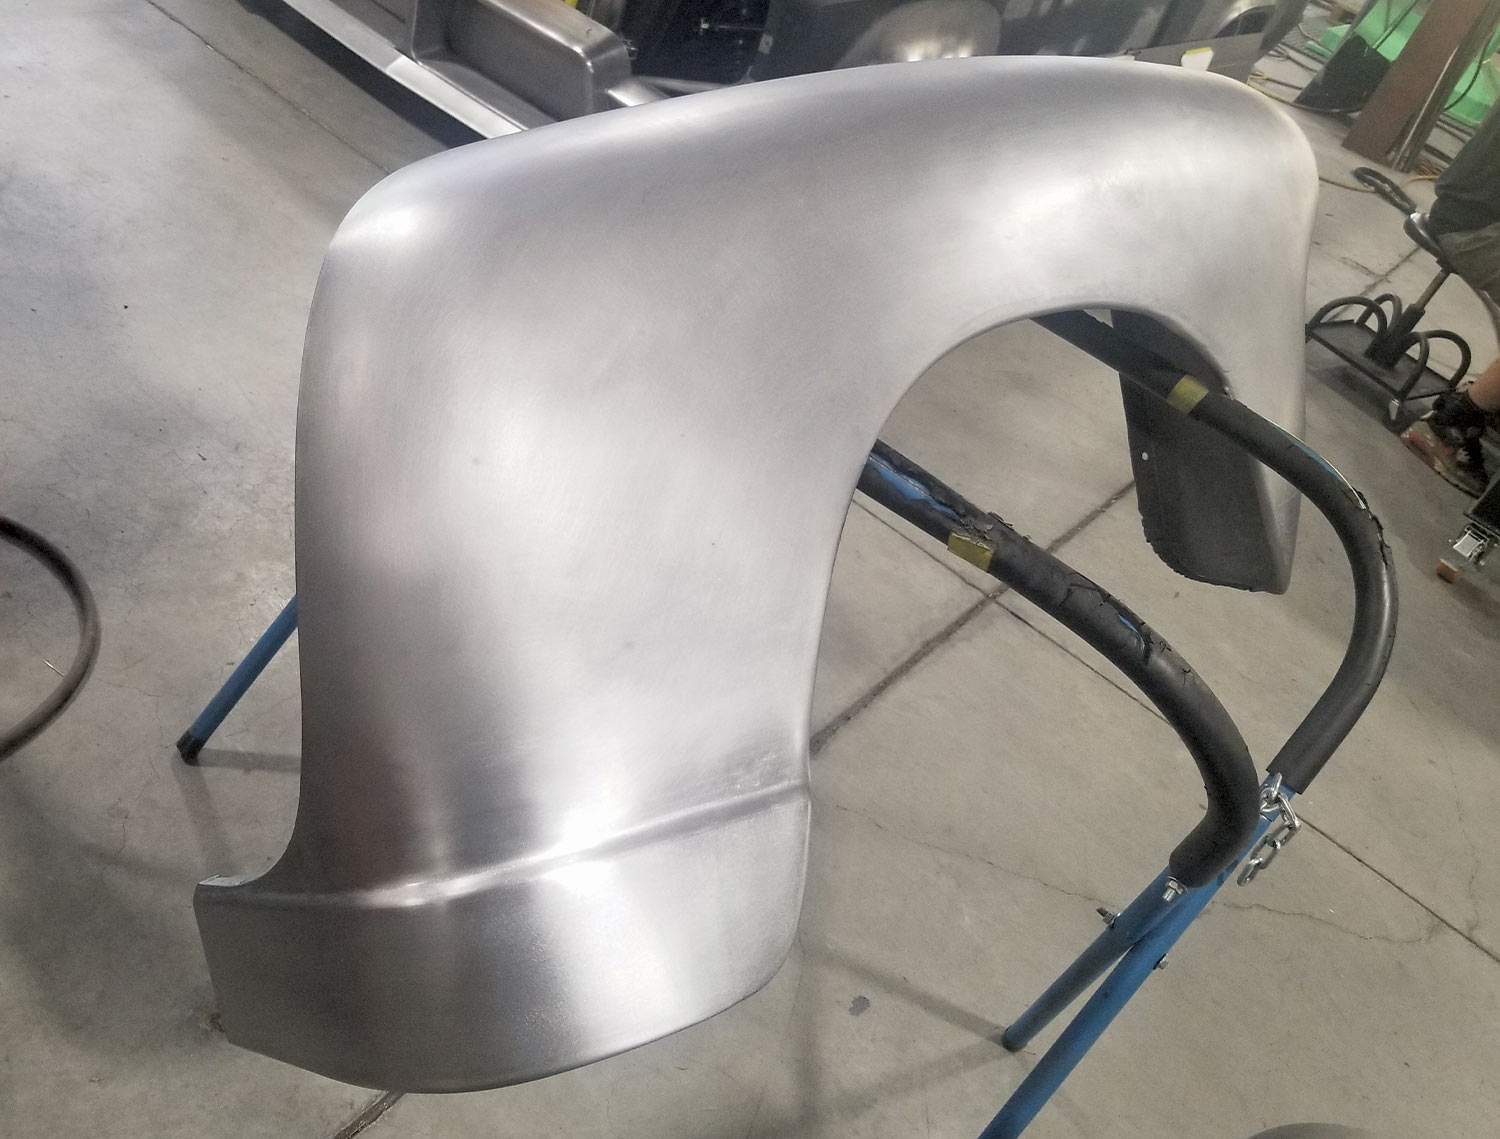 the passenger side front fender with metalwork complete